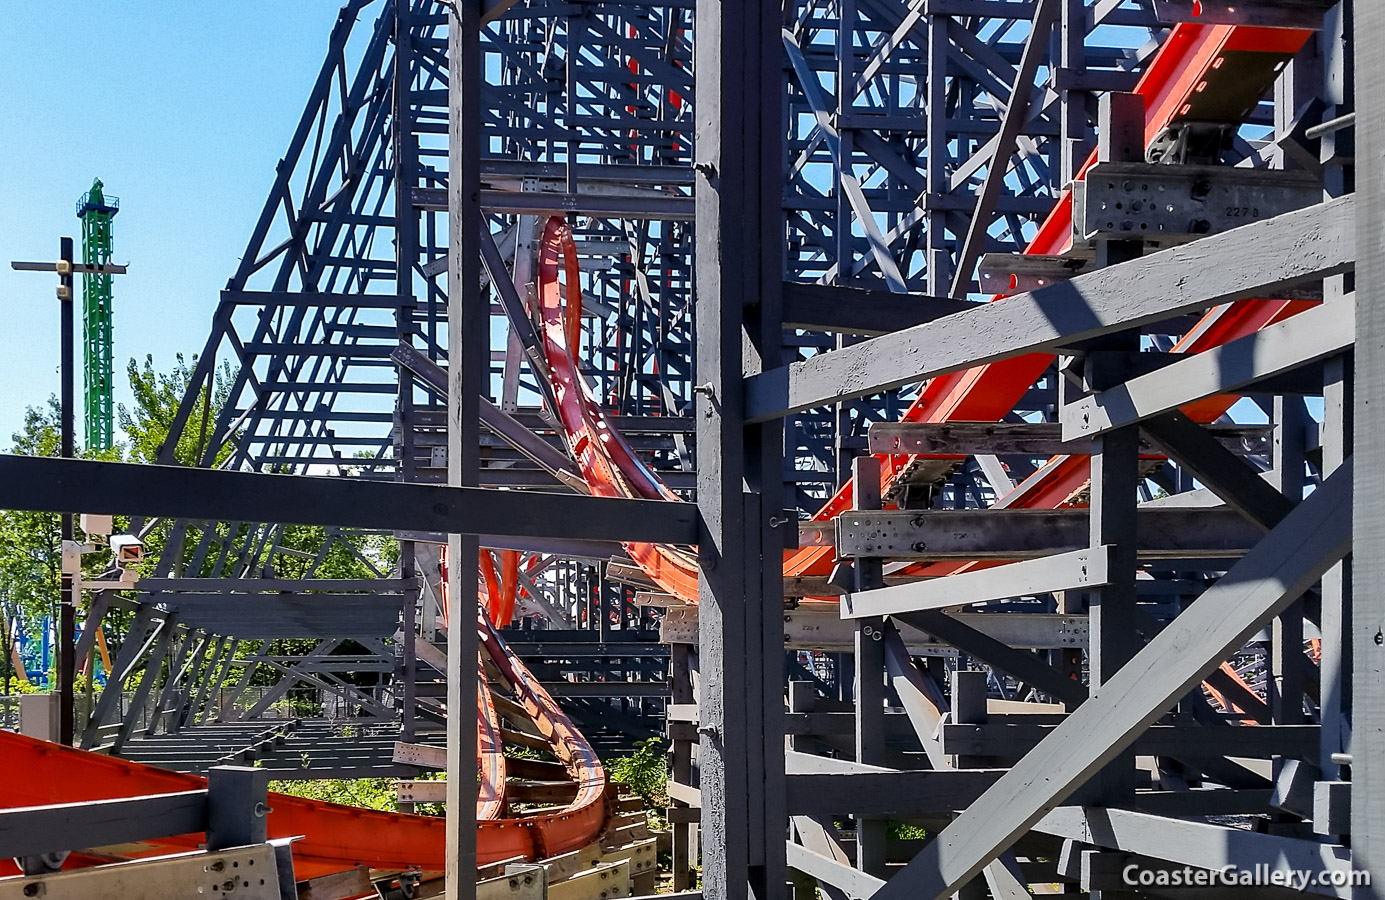 Block Brake system on the Wicked Cyclone roller coaster at Six Flags New England